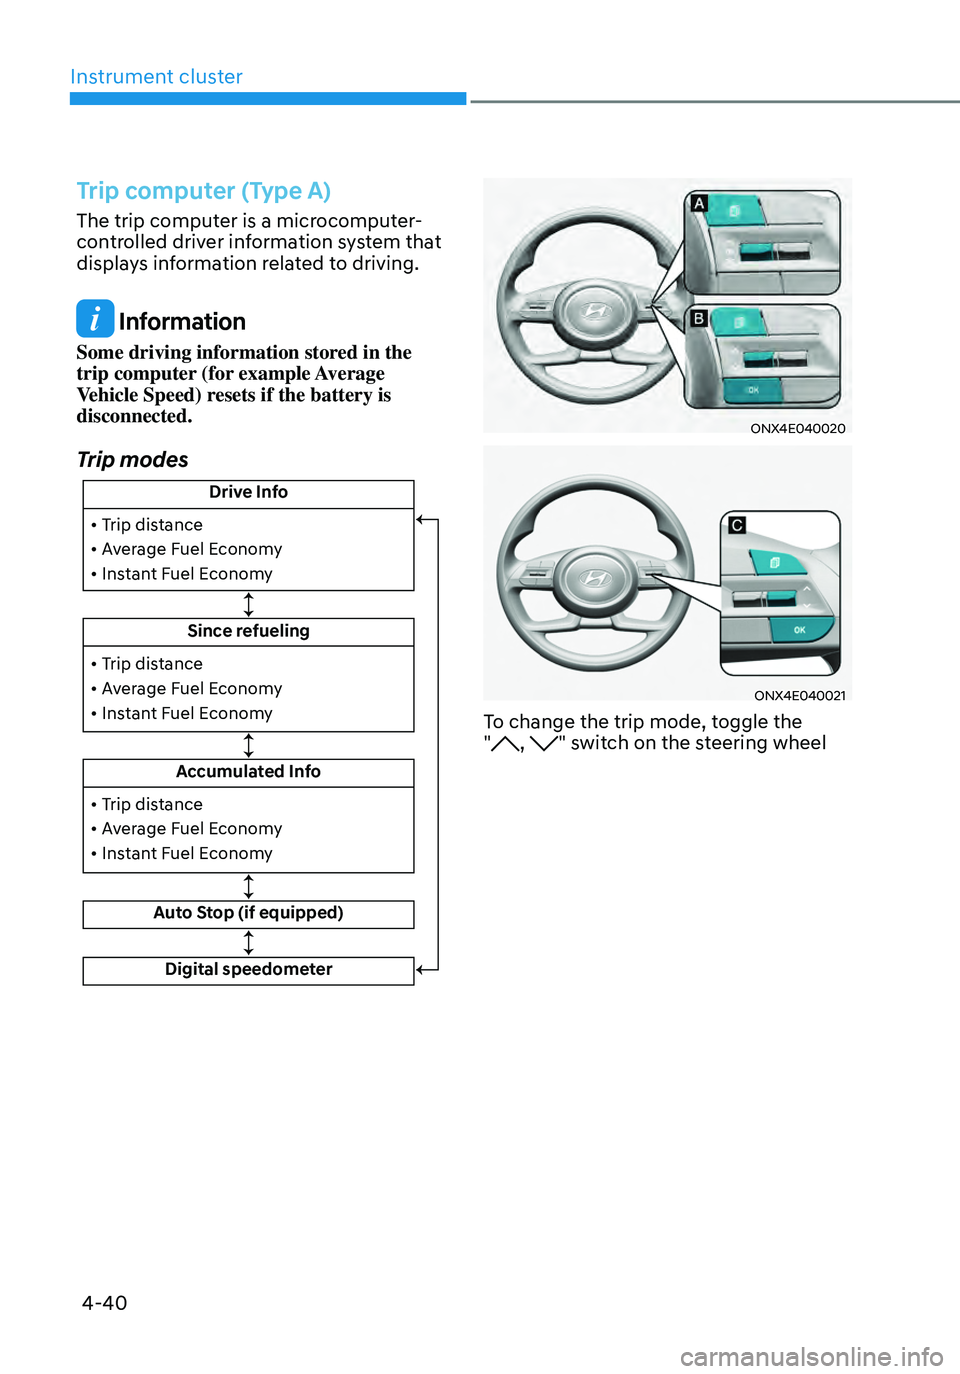 HYUNDAI TUCSON 2022  Owners Manual Instrument cluster
4-40
Trip computer (Type A)
The trip computer is a microcomputer-
controlled driver information system that 
displays information related to driving.
 Information
Some driving infor